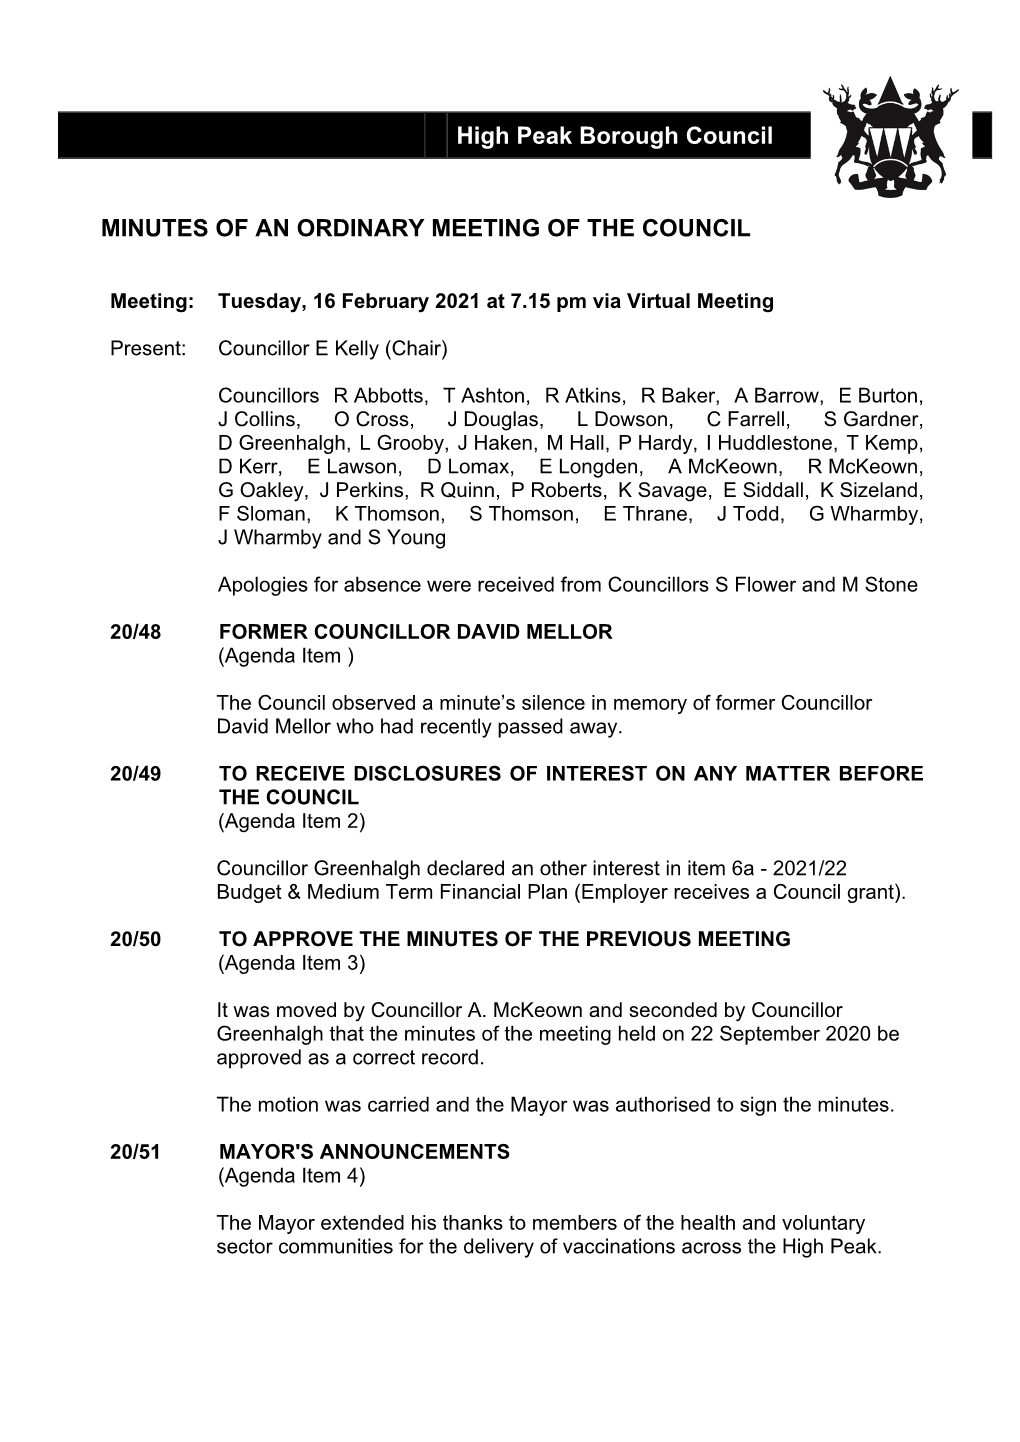 To Approve the Minutes of the Previous Meeting PDF 186 KB